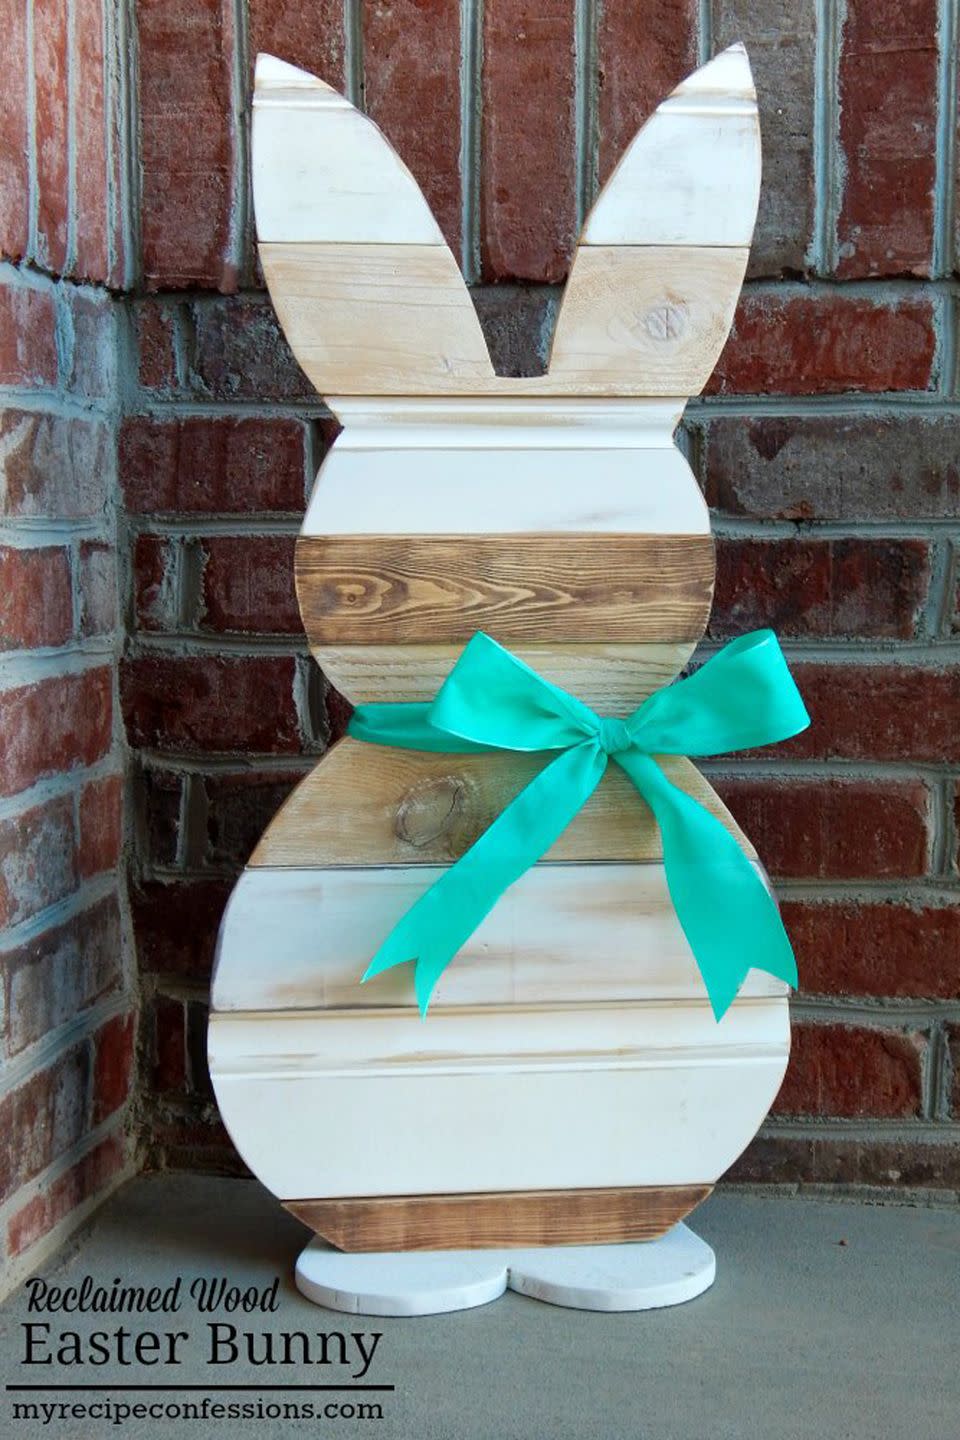 Reclaimed Wood Easter Bunny